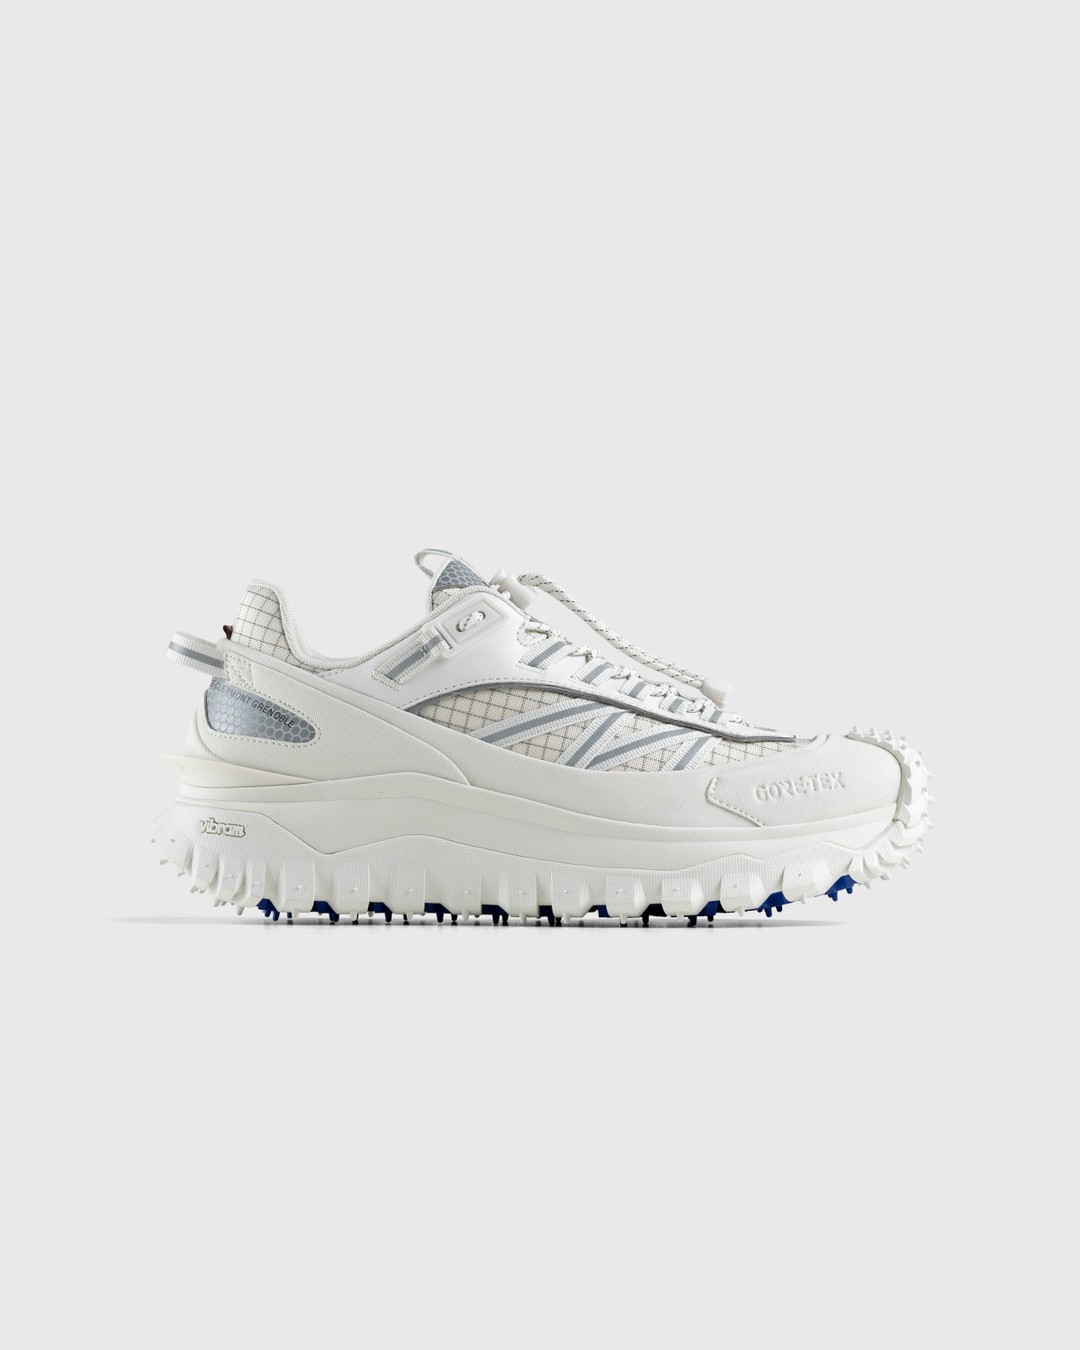 Moncler – Trailgrip GTX Sneakers Off White - Sneakers - White - Image 1